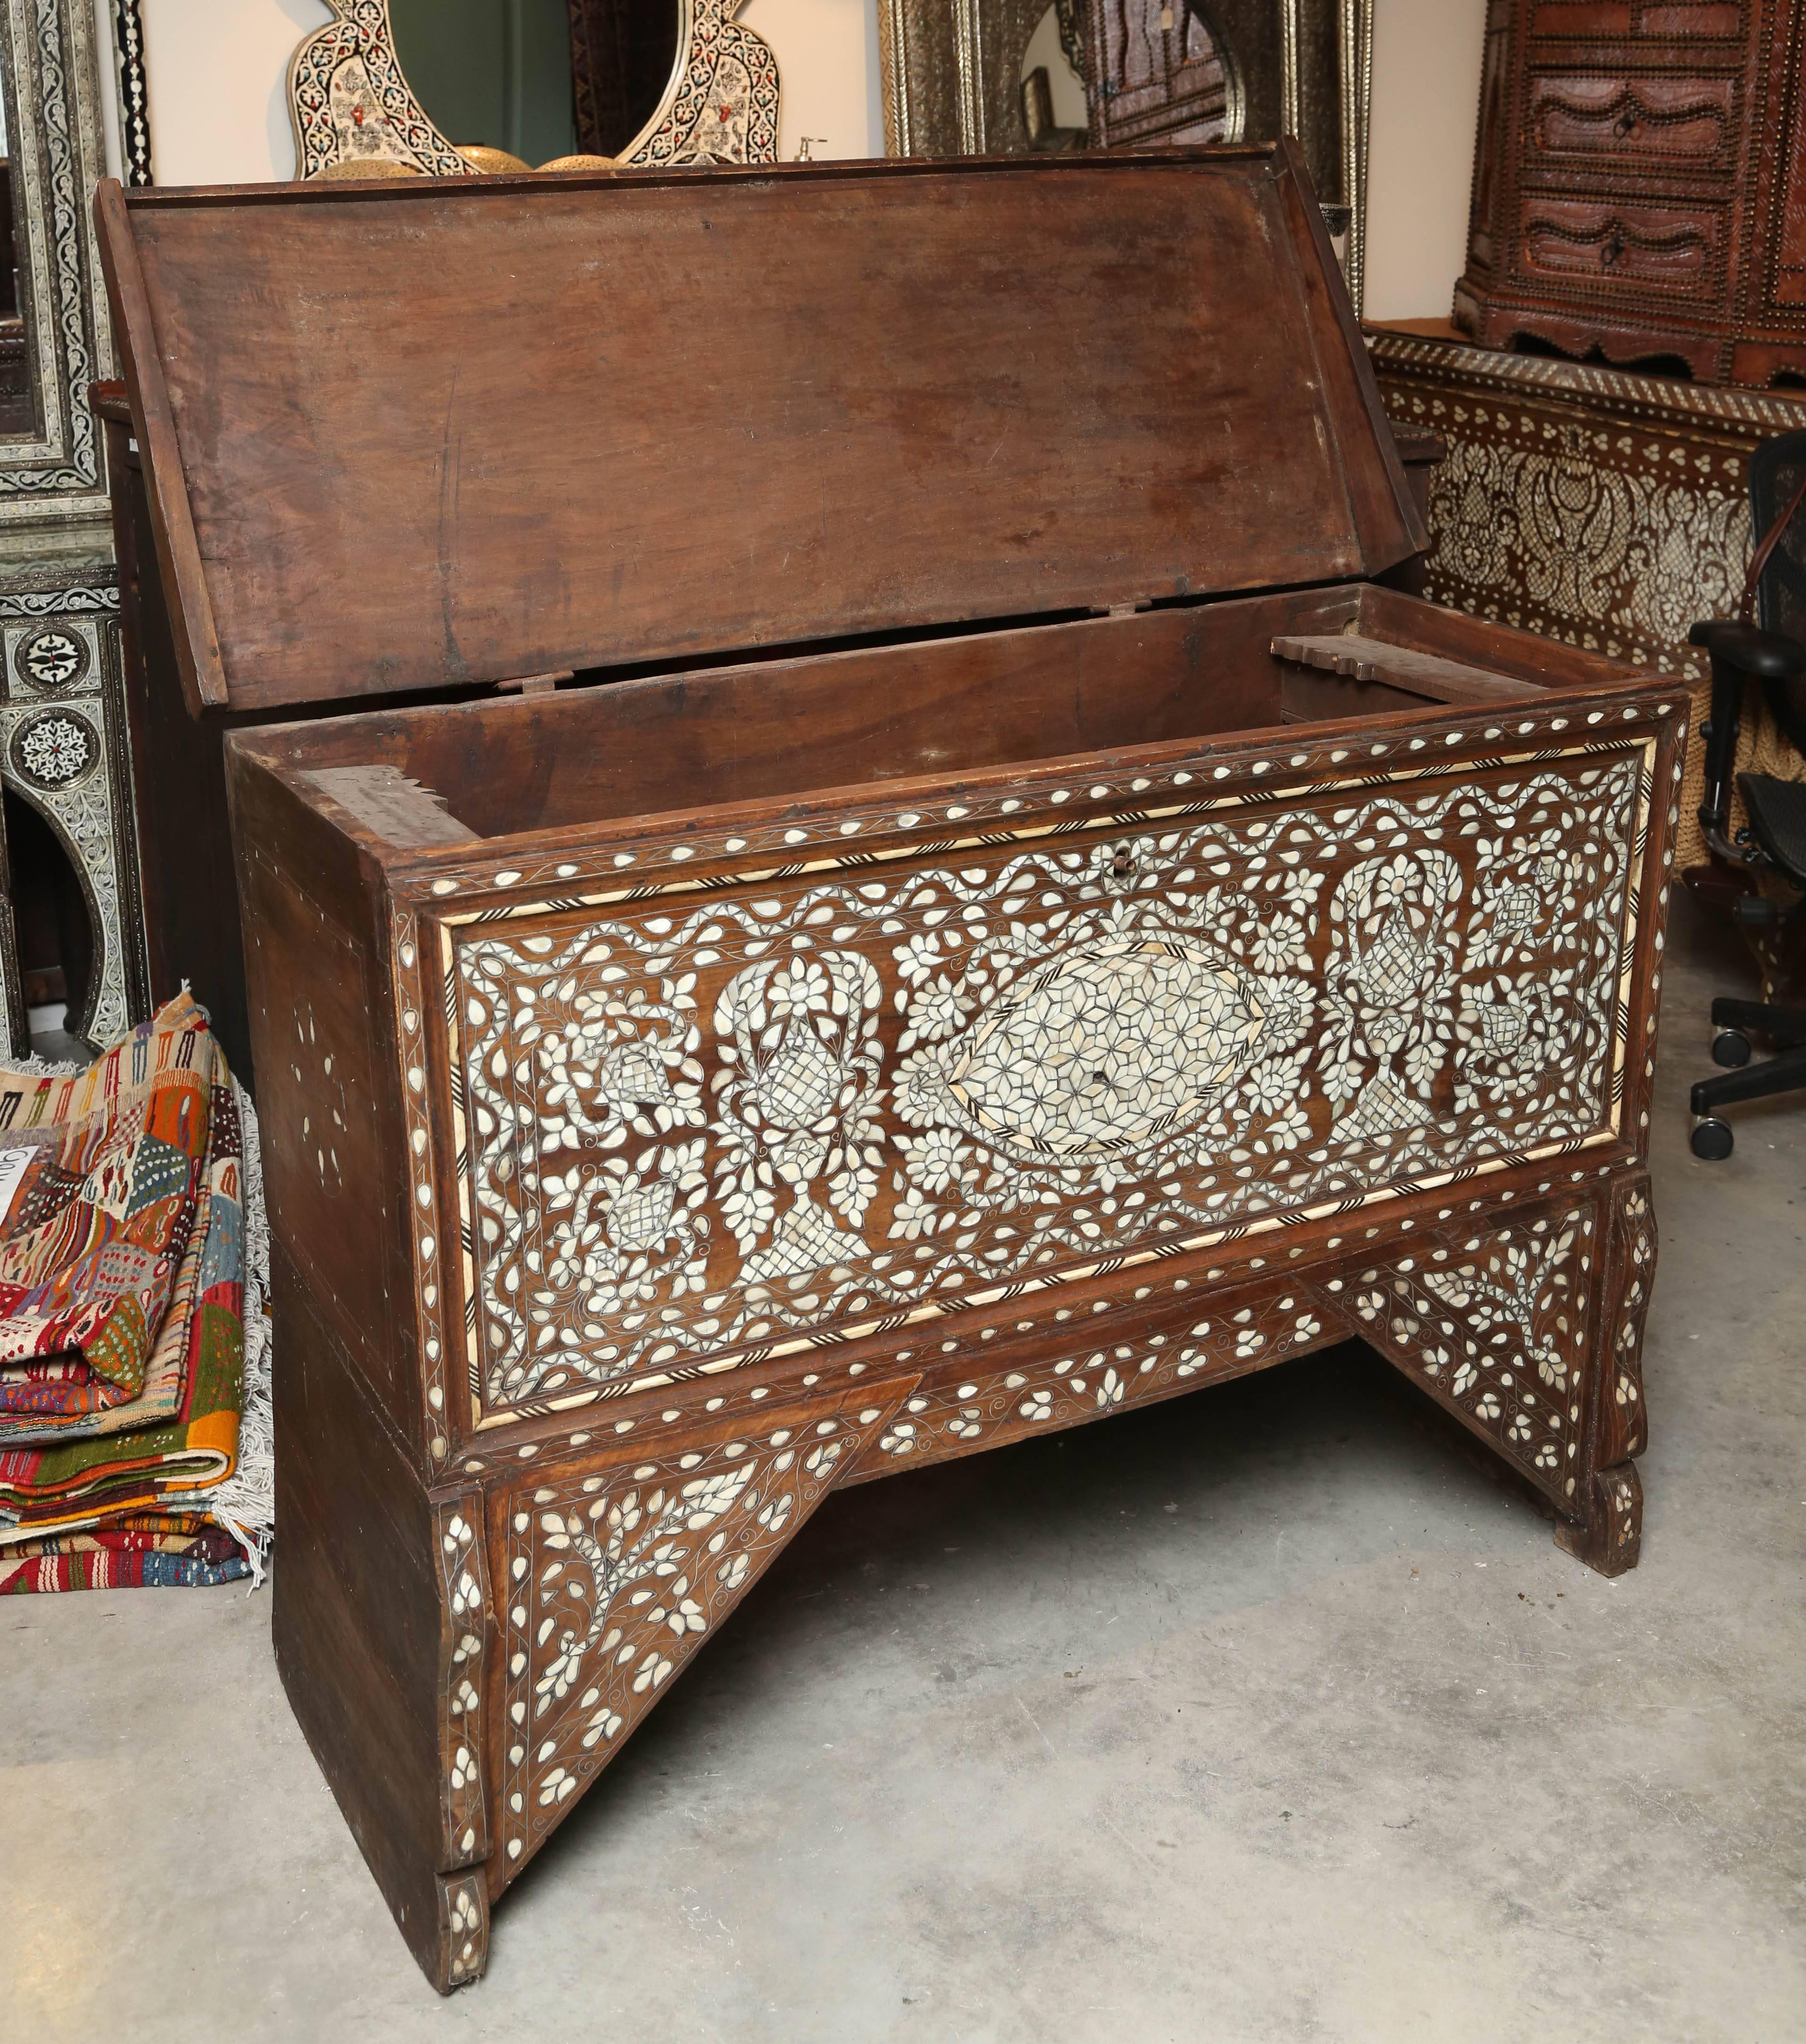 Mother-of-Pearl wedding chest from Syria. Intricate mother-of-pearl and camel bone inlay. One-of-a-kind Moorish geometric design.
Measures: 52 3/4 W x 20 1/4 x 39 3/4 H.